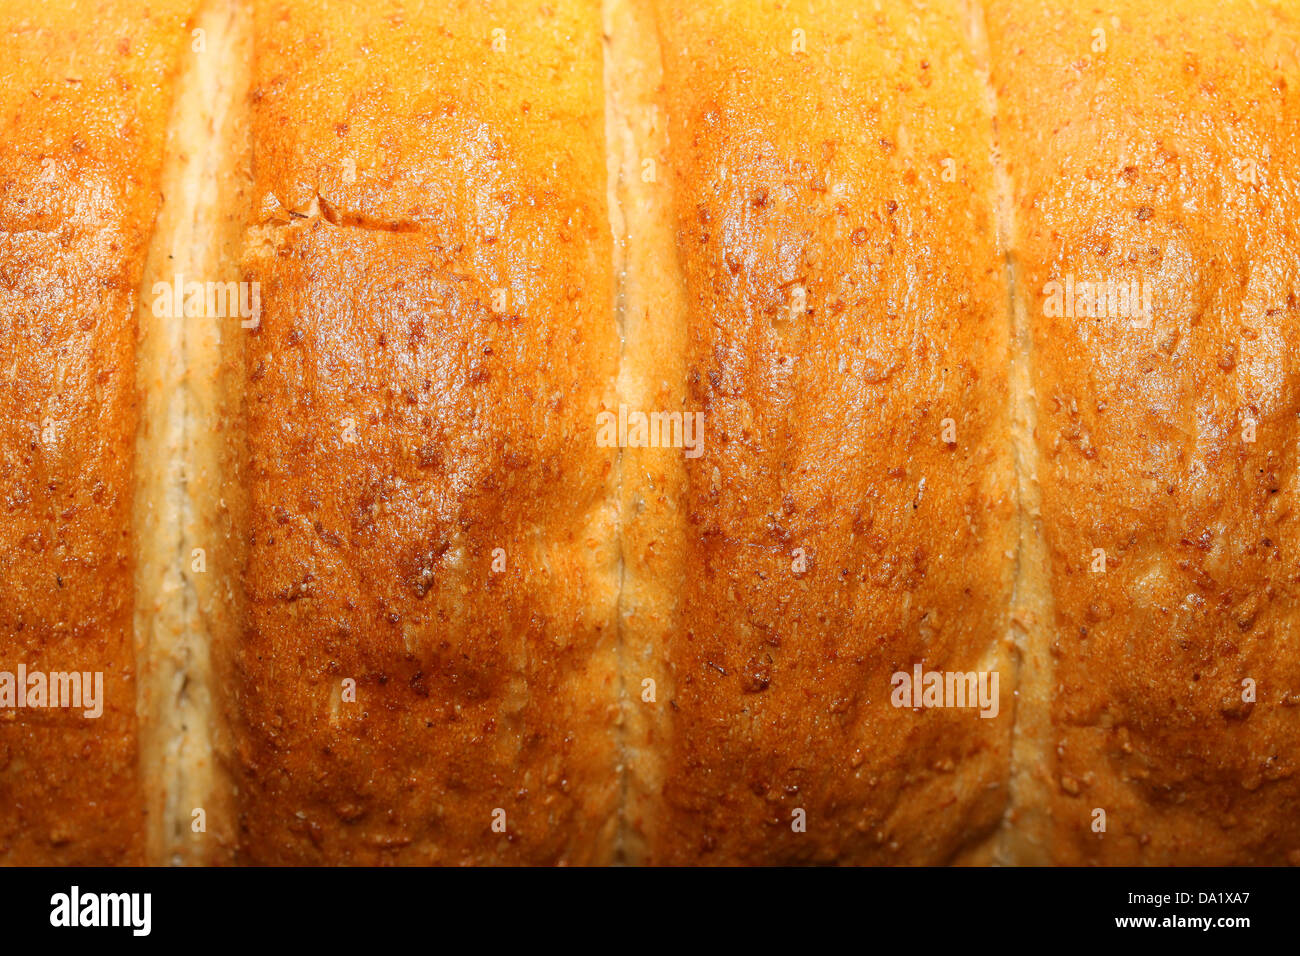 This is a closeup shot of baked goods, shallow doff, like nice food background. Stock Photo